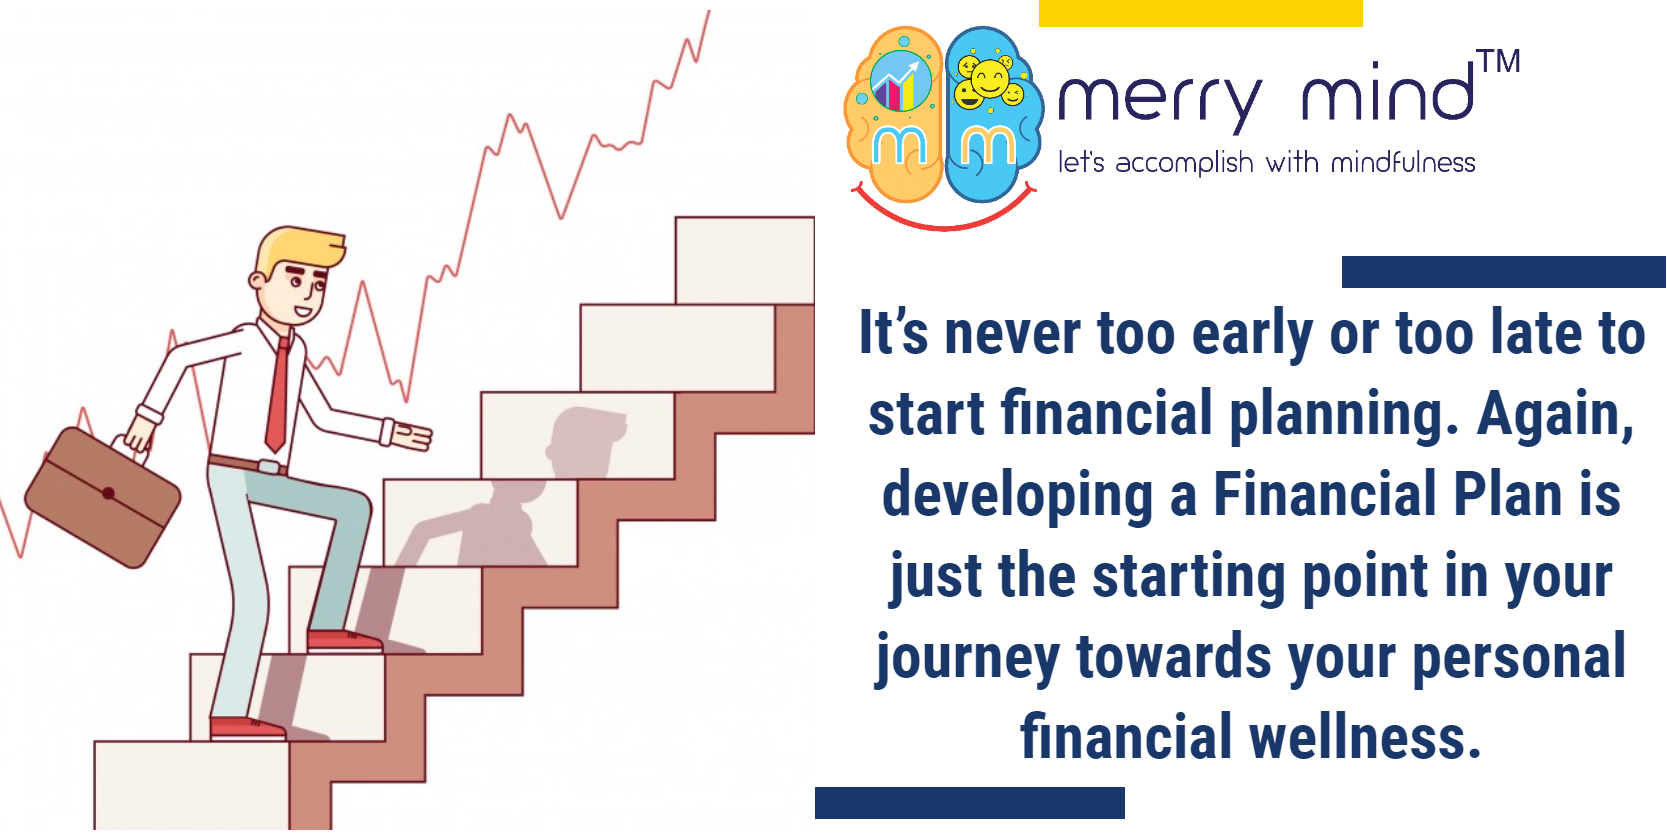 Thinking when to start financial planning? The appropriate time is now...